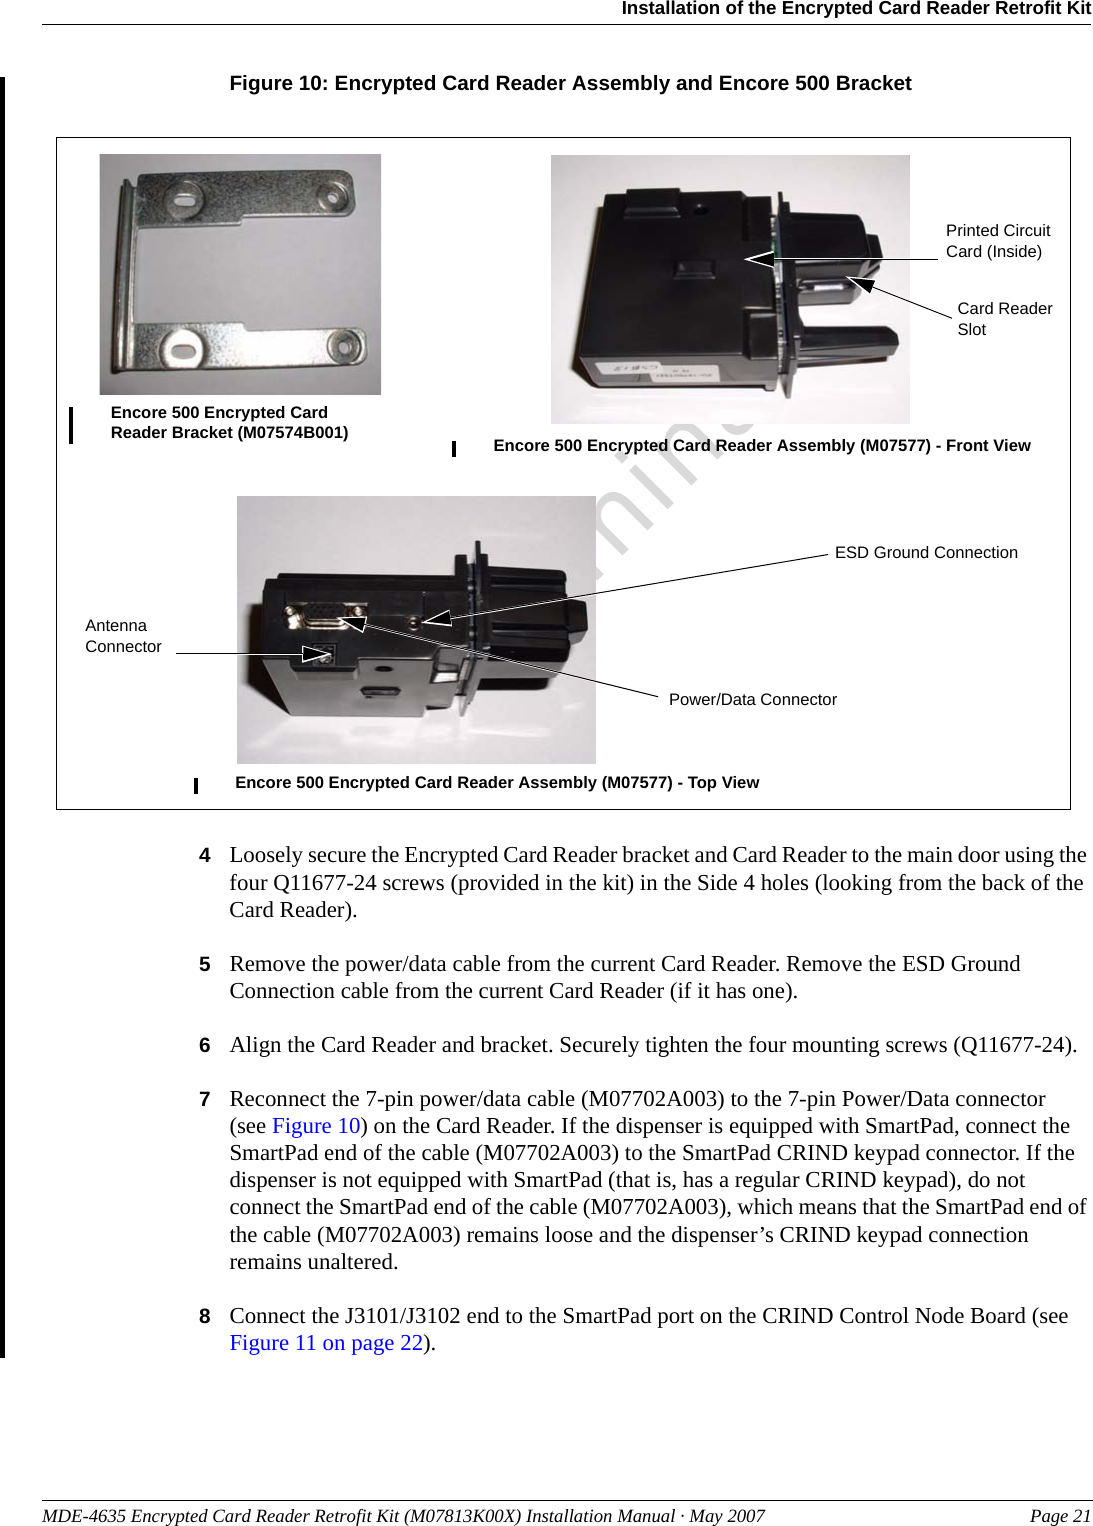 MDE-4635 Encrypted Card Reader Retrofit Kit (M07813K00X) Installation Manual · May 2007 Page 21Installation of the Encrypted Card Reader Retrofit KitPreliminaryFigure 10: Encrypted Card Reader Assembly and Encore 500 BracketEncore 500 Encrypted Card Reader Bracket (M07574B001) Encore 500 Encrypted Card Reader Assembly (M07577) - Front ViewEncore 500 Encrypted Card Reader Assembly (M07577) - Top ViewPrinted Circuit Card (Inside)Power/Data ConnectorCard Reader SlotESD Ground ConnectionAntenna Connector4Loosely secure the Encrypted Card Reader bracket and Card Reader to the main door using the four Q11677-24 screws (provided in the kit) in the Side 4 holes (looking from the back of the Card Reader).5Remove the power/data cable from the current Card Reader. Remove the ESD Ground Connection cable from the current Card Reader (if it has one).6Align the Card Reader and bracket. Securely tighten the four mounting screws (Q11677-24).7Reconnect the 7-pin power/data cable (M07702A003) to the 7-pin Power/Data connector(see Figure 10) on the Card Reader. If the dispenser is equipped with SmartPad, connect the SmartPad end of the cable (M07702A003) to the SmartPad CRIND keypad connector. If the dispenser is not equipped with SmartPad (that is, has a regular CRIND keypad), do not connect the SmartPad end of the cable (M07702A003), which means that the SmartPad end of the cable (M07702A003) remains loose and the dispenser’s CRIND keypad connection remains unaltered.8Connect the J3101/J3102 end to the SmartPad port on the CRIND Control Node Board (see Figure 11 on page 22).